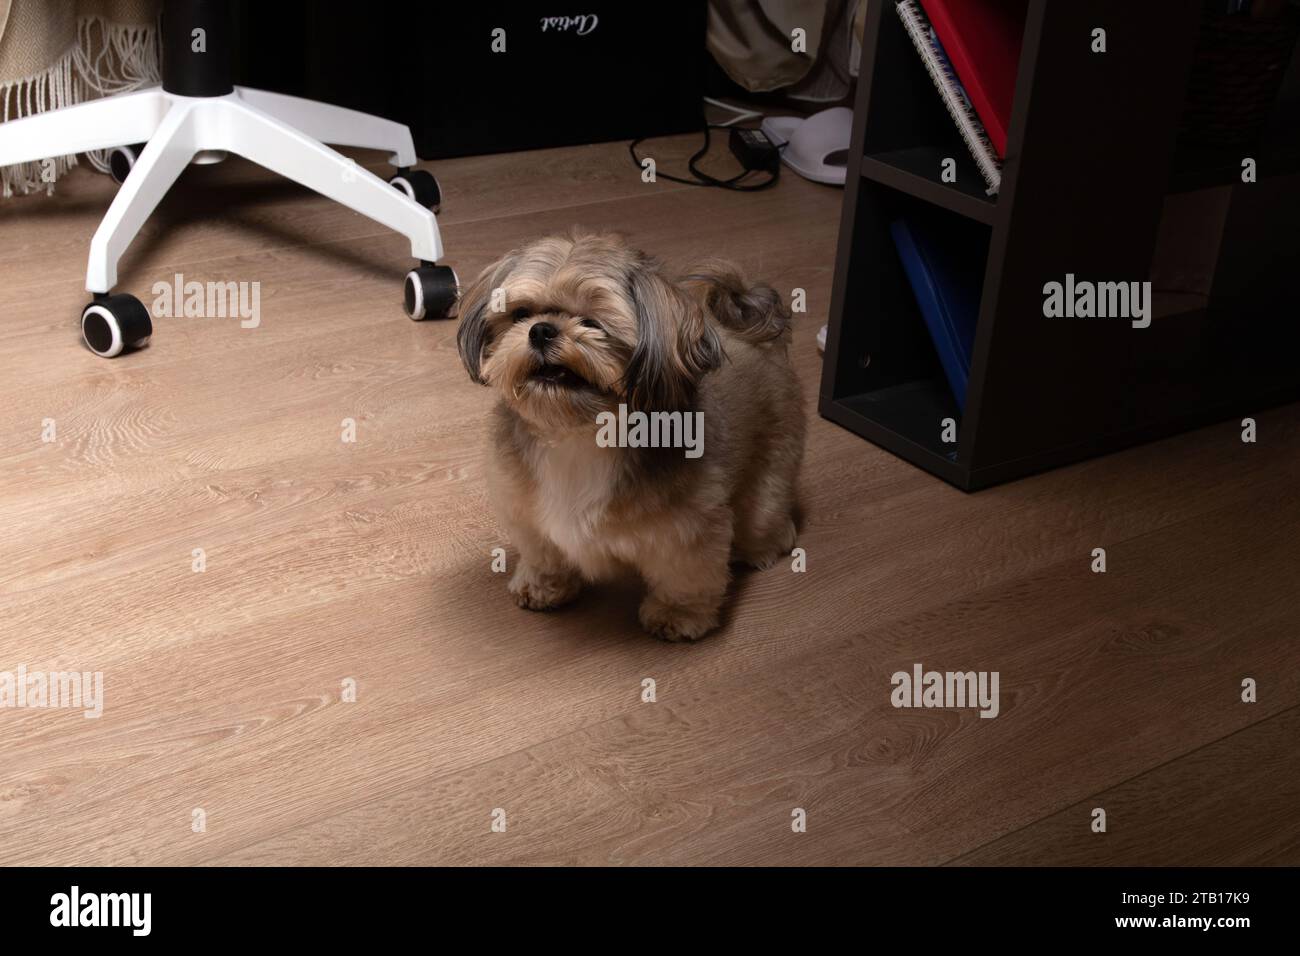 photography, shih tzu, sitting, domestic animals, breed, dog, pet, young, small, friendly, living room, friendship, horizontal, playing, copy space, a Stock Photo